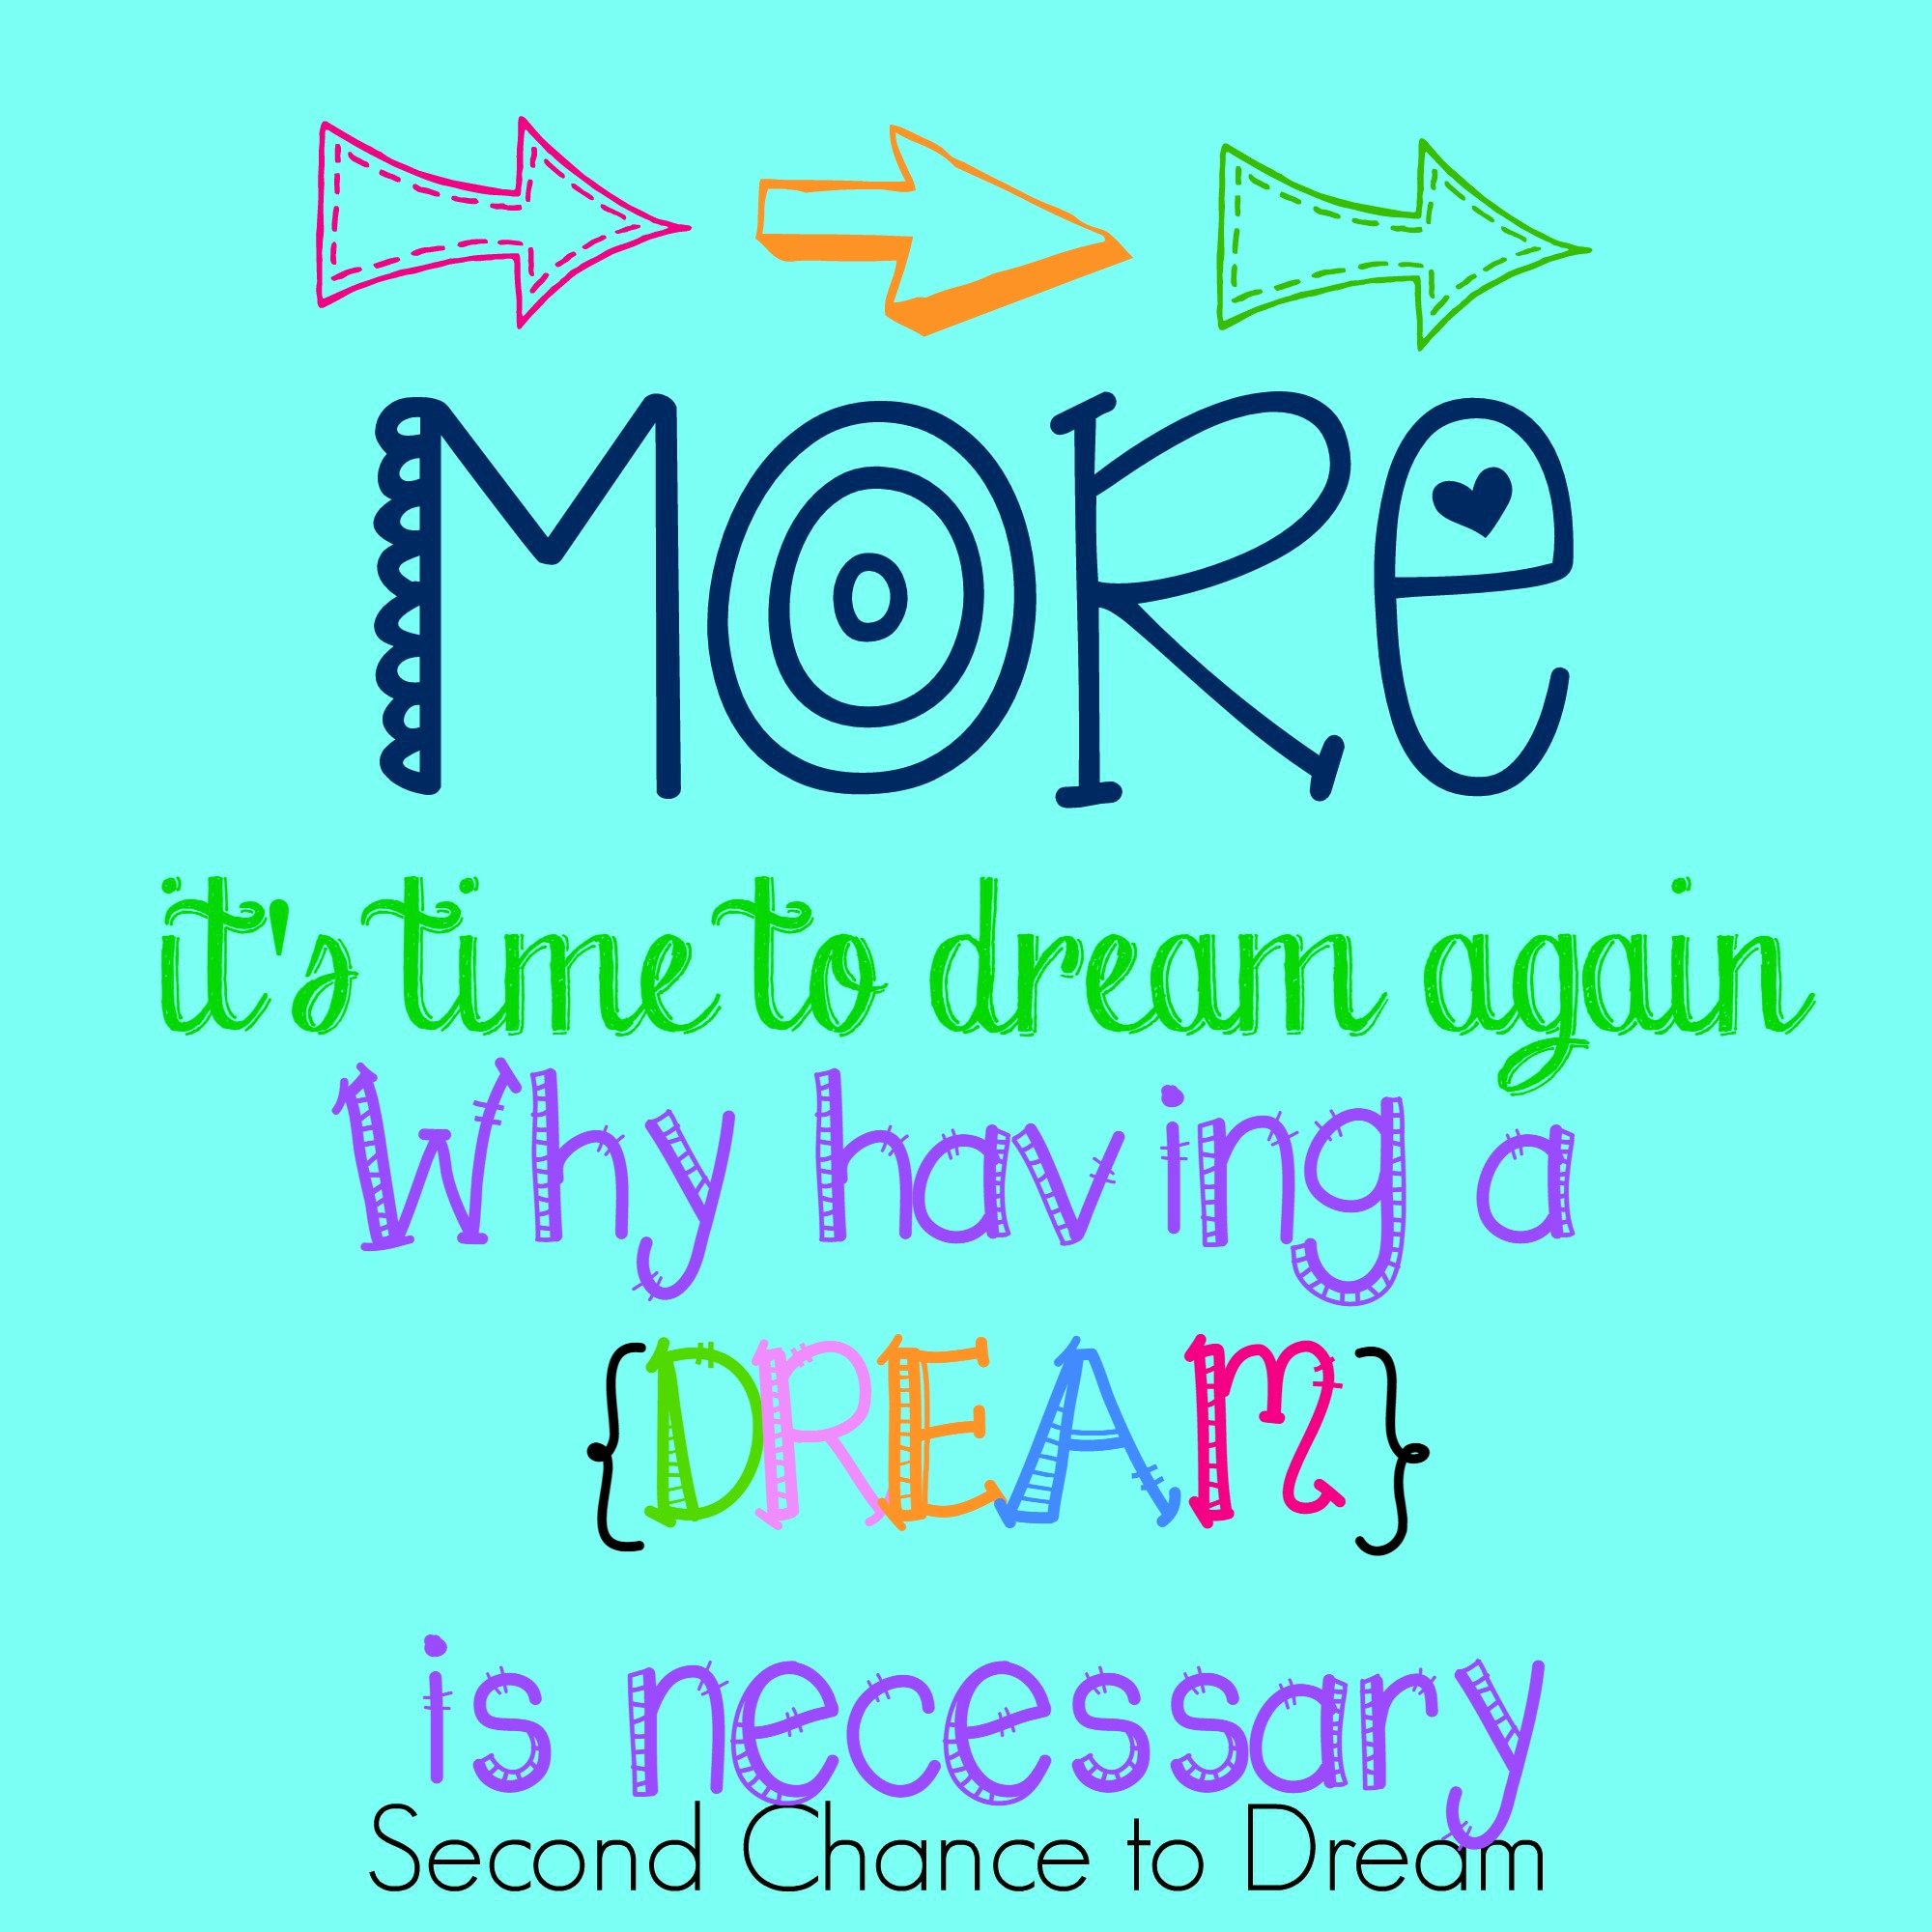 Second Chance to Dream: Why having a {DREAM} is necessary